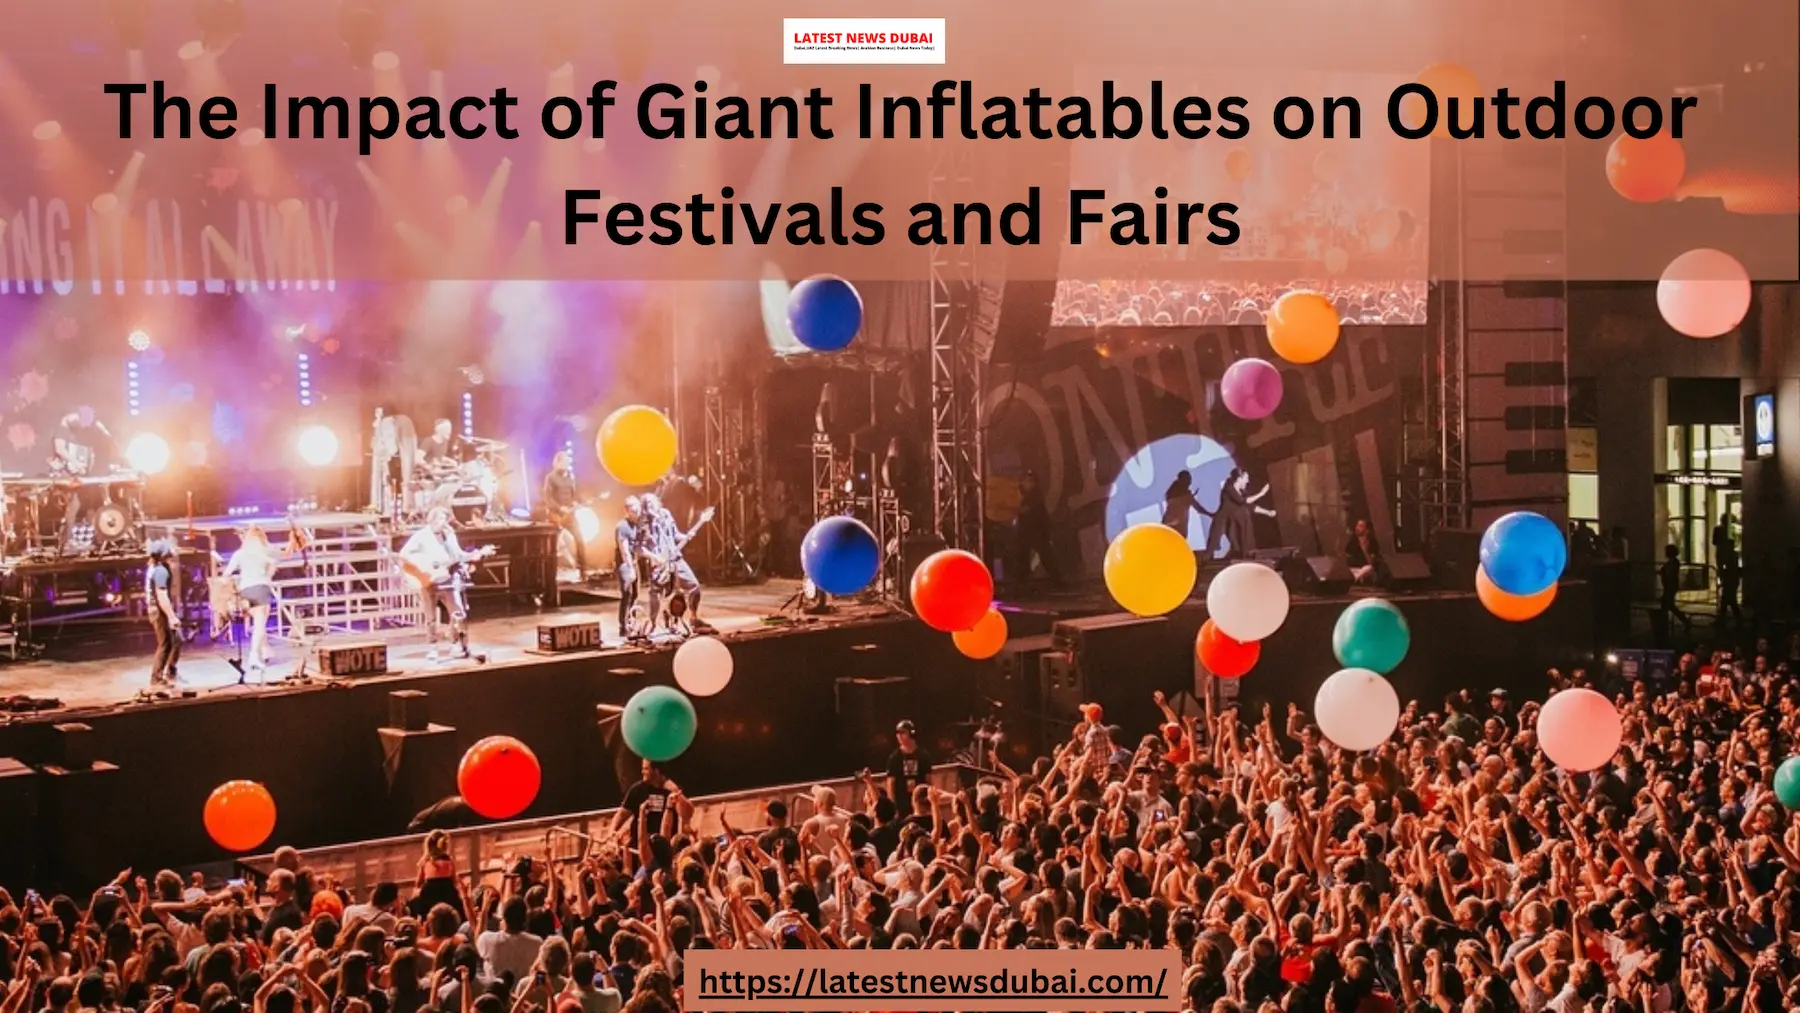 Impact of Giant Inflatables on Outdoor Festivals and Fairs